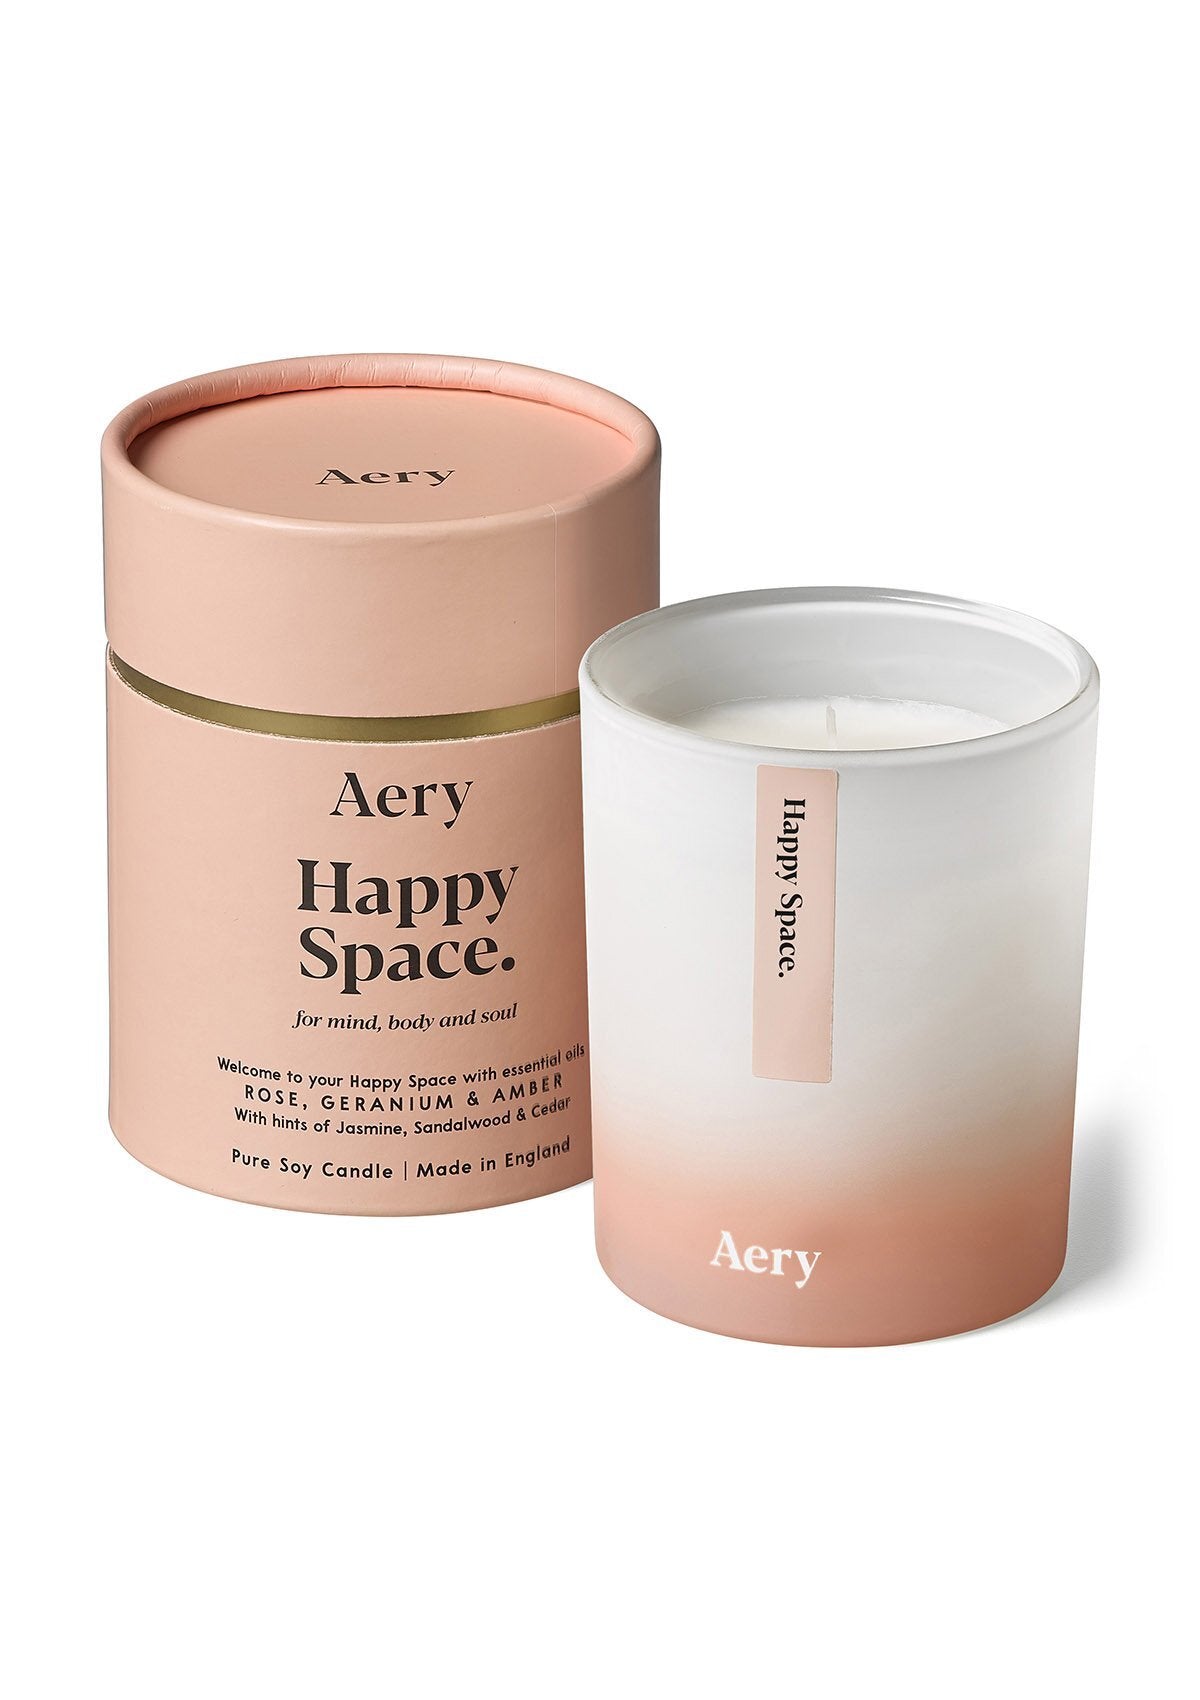 Happy Space Scented Plant Based Wax Candle - Rose Geranium and Amber - The Bristol Artisan Handmade Sustainable Gifts and Homewares.